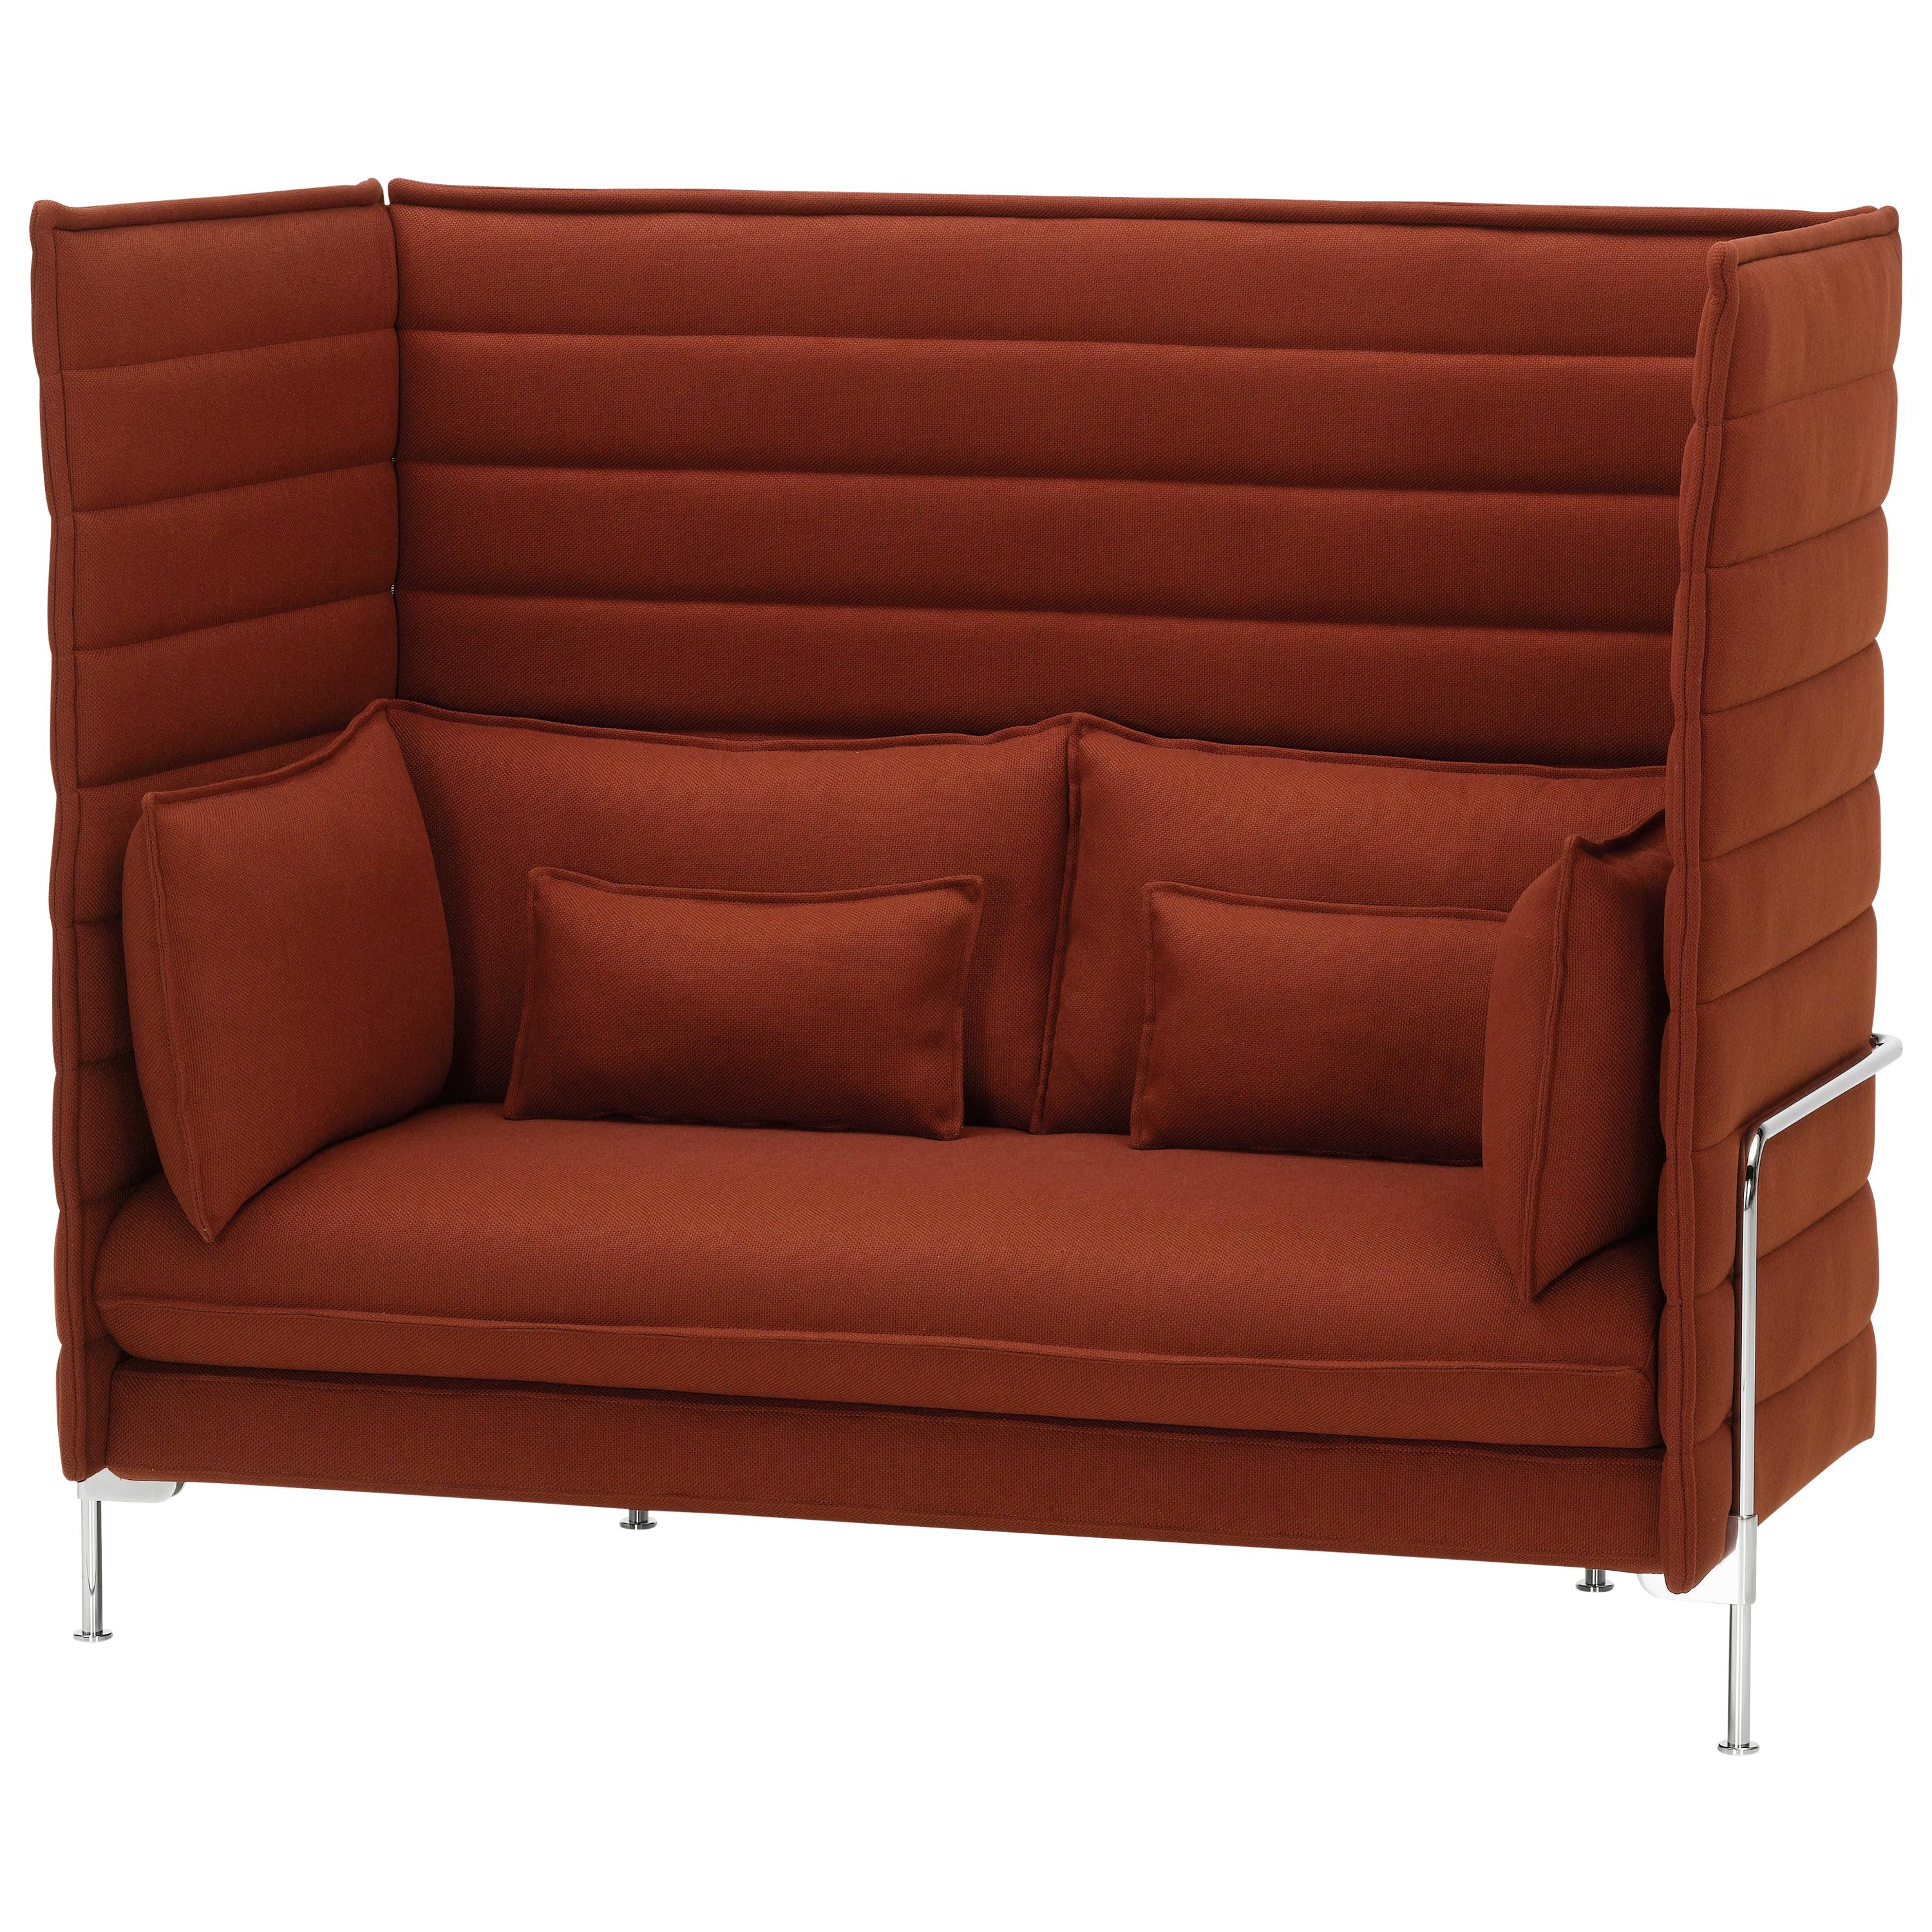 Vitra Alcove Highback 2-Seater Sofa in Brick Volo by Ronan & Erwan Bouroullec For Sale